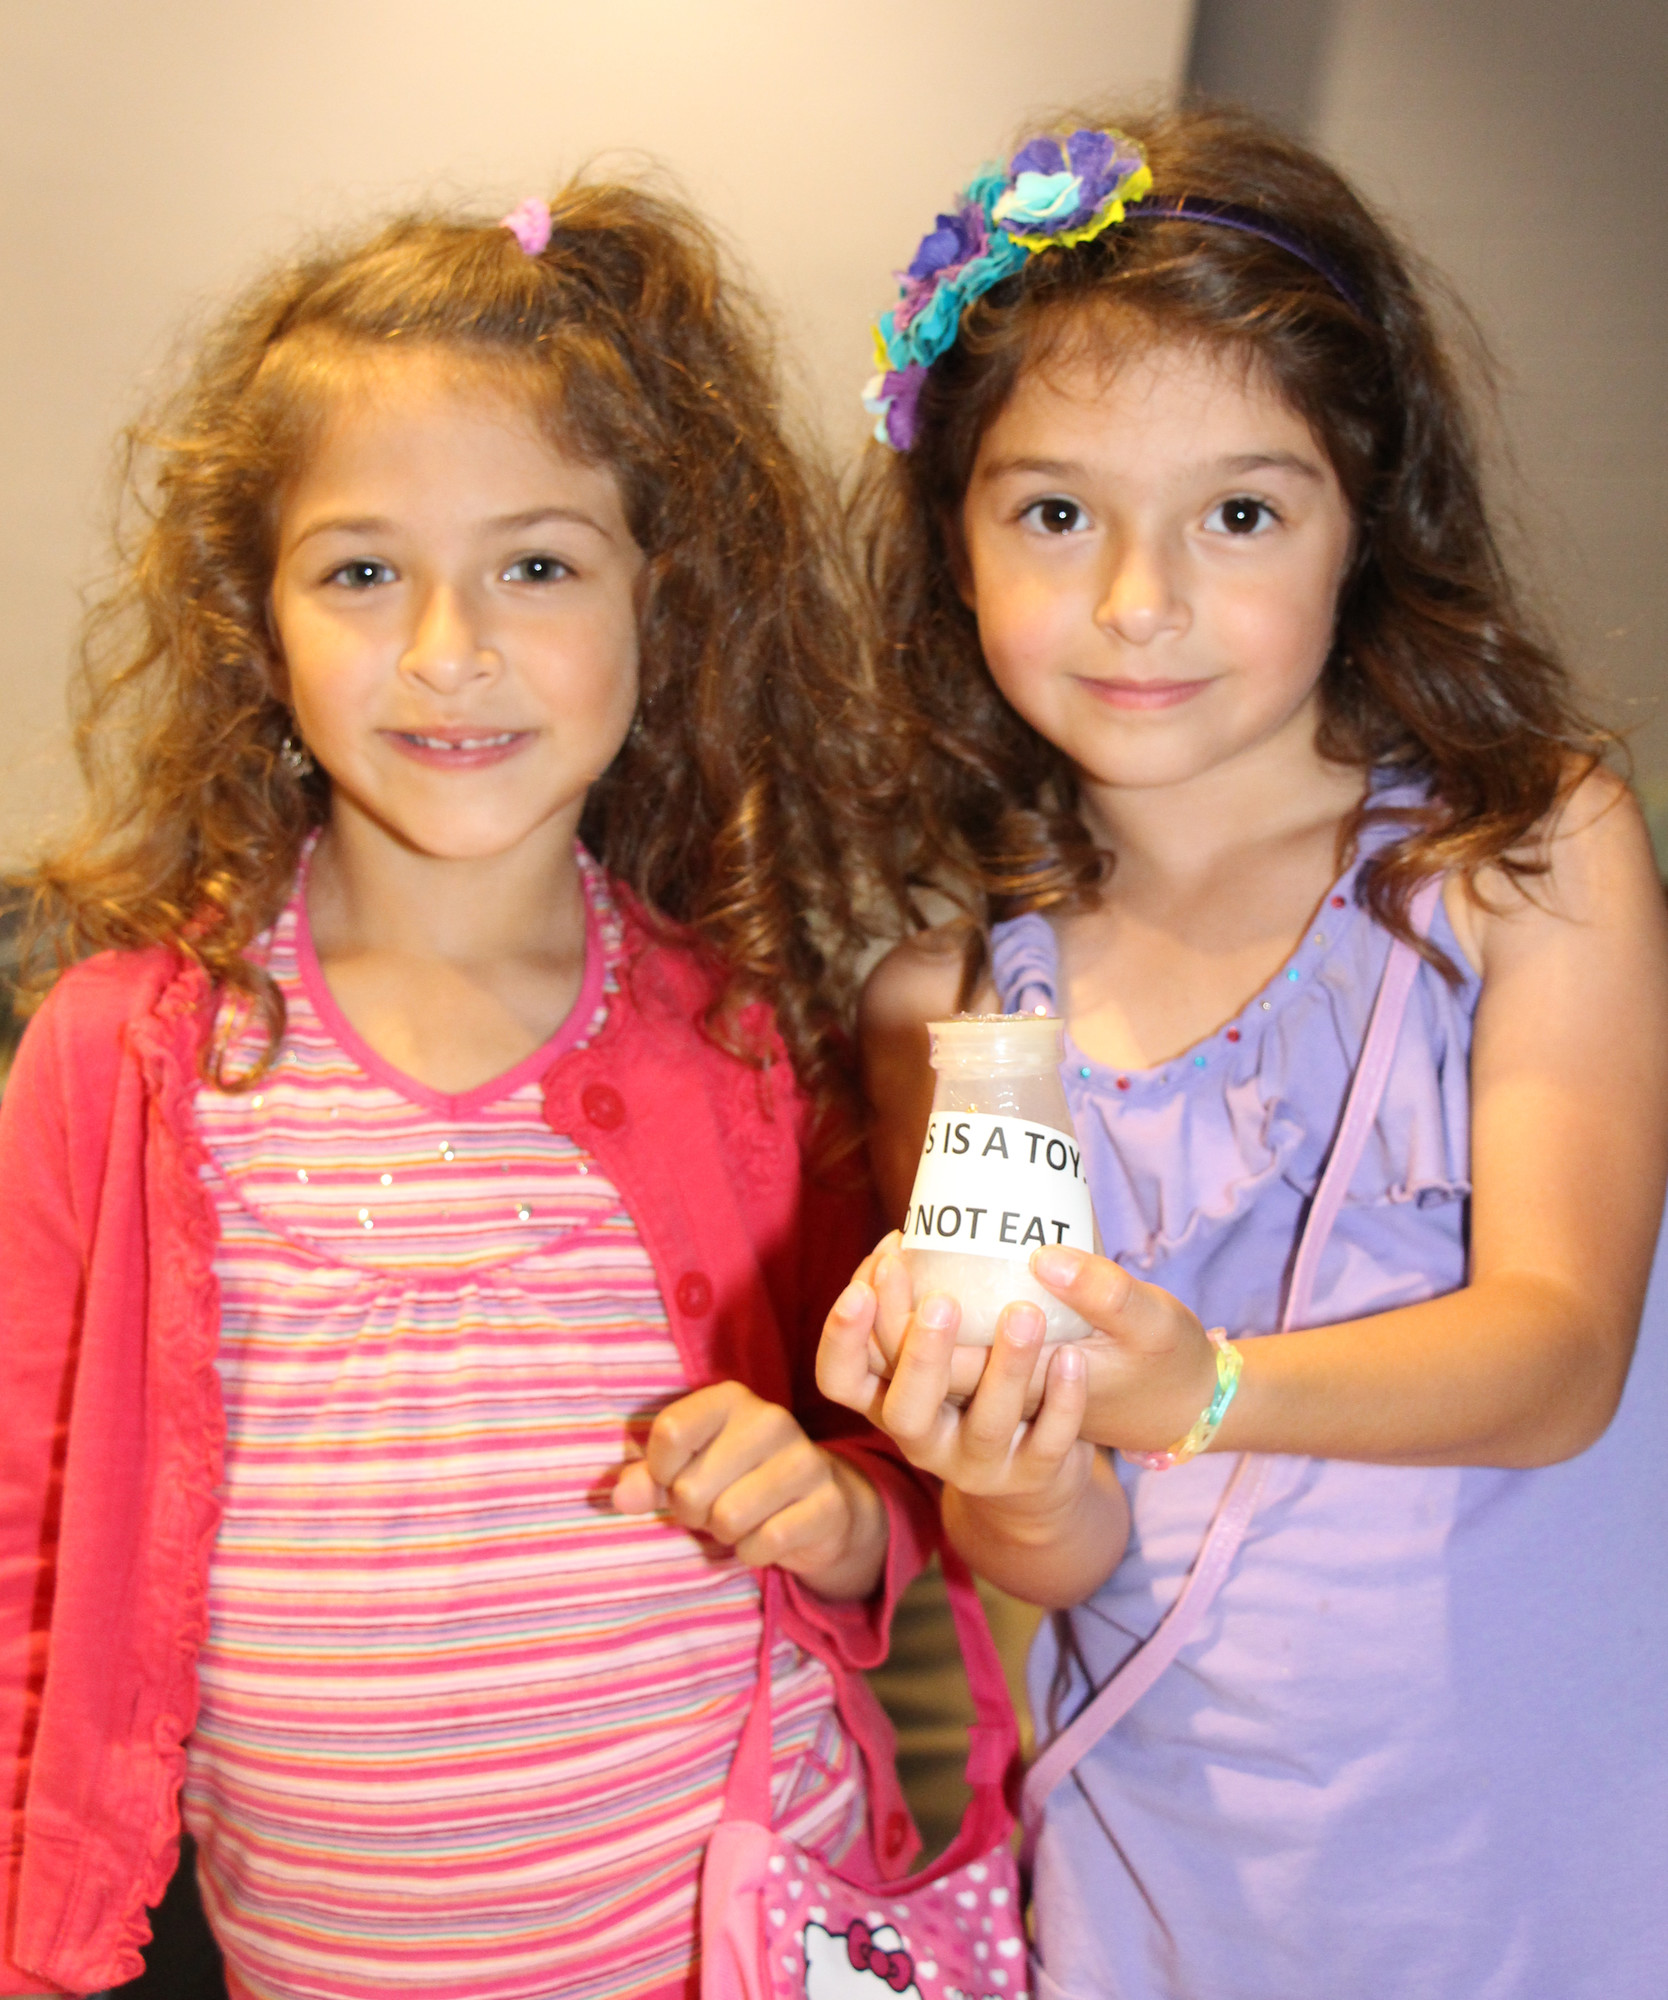 Sophia Tephly, 7, left, and Christina Tephly, 7, showed off a prize they won during the event.